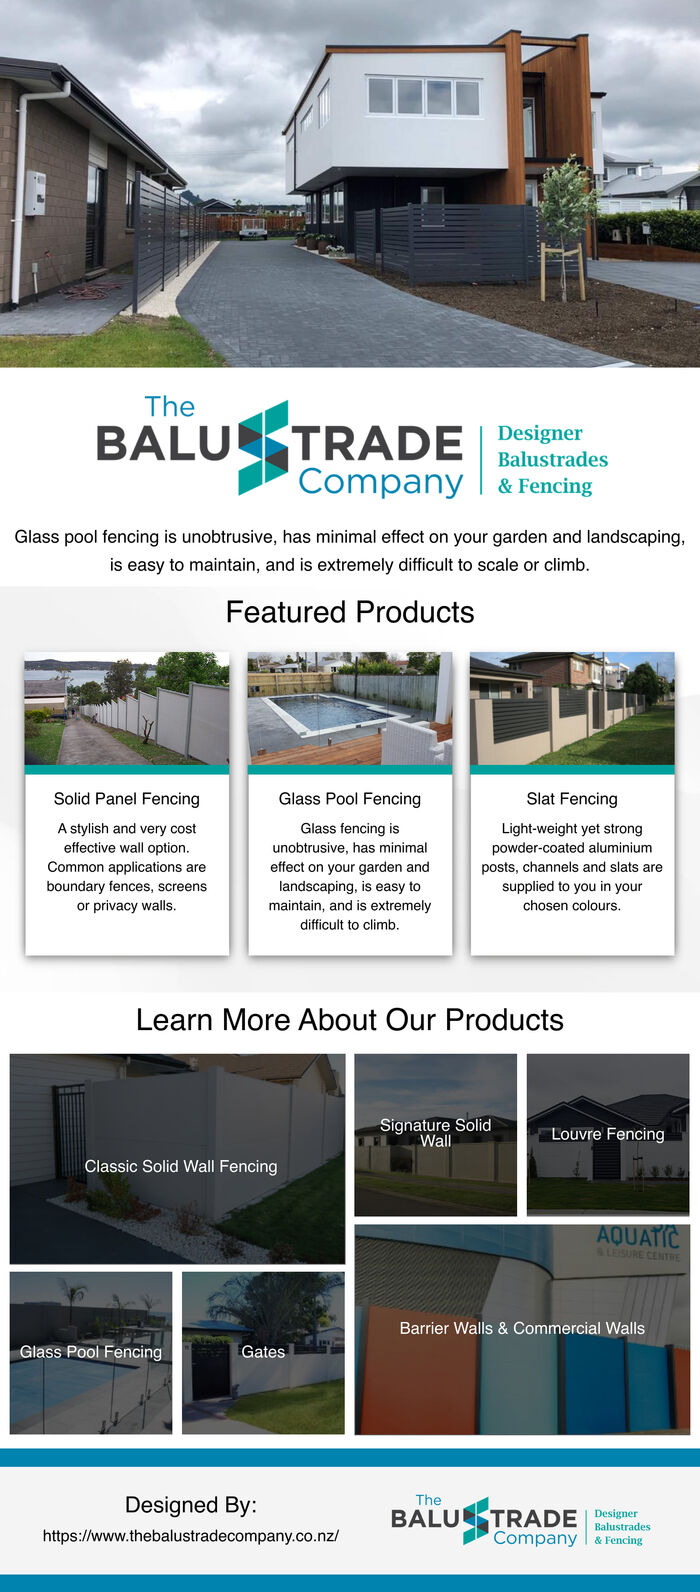 This Infographic is designed by The Balustrade Company